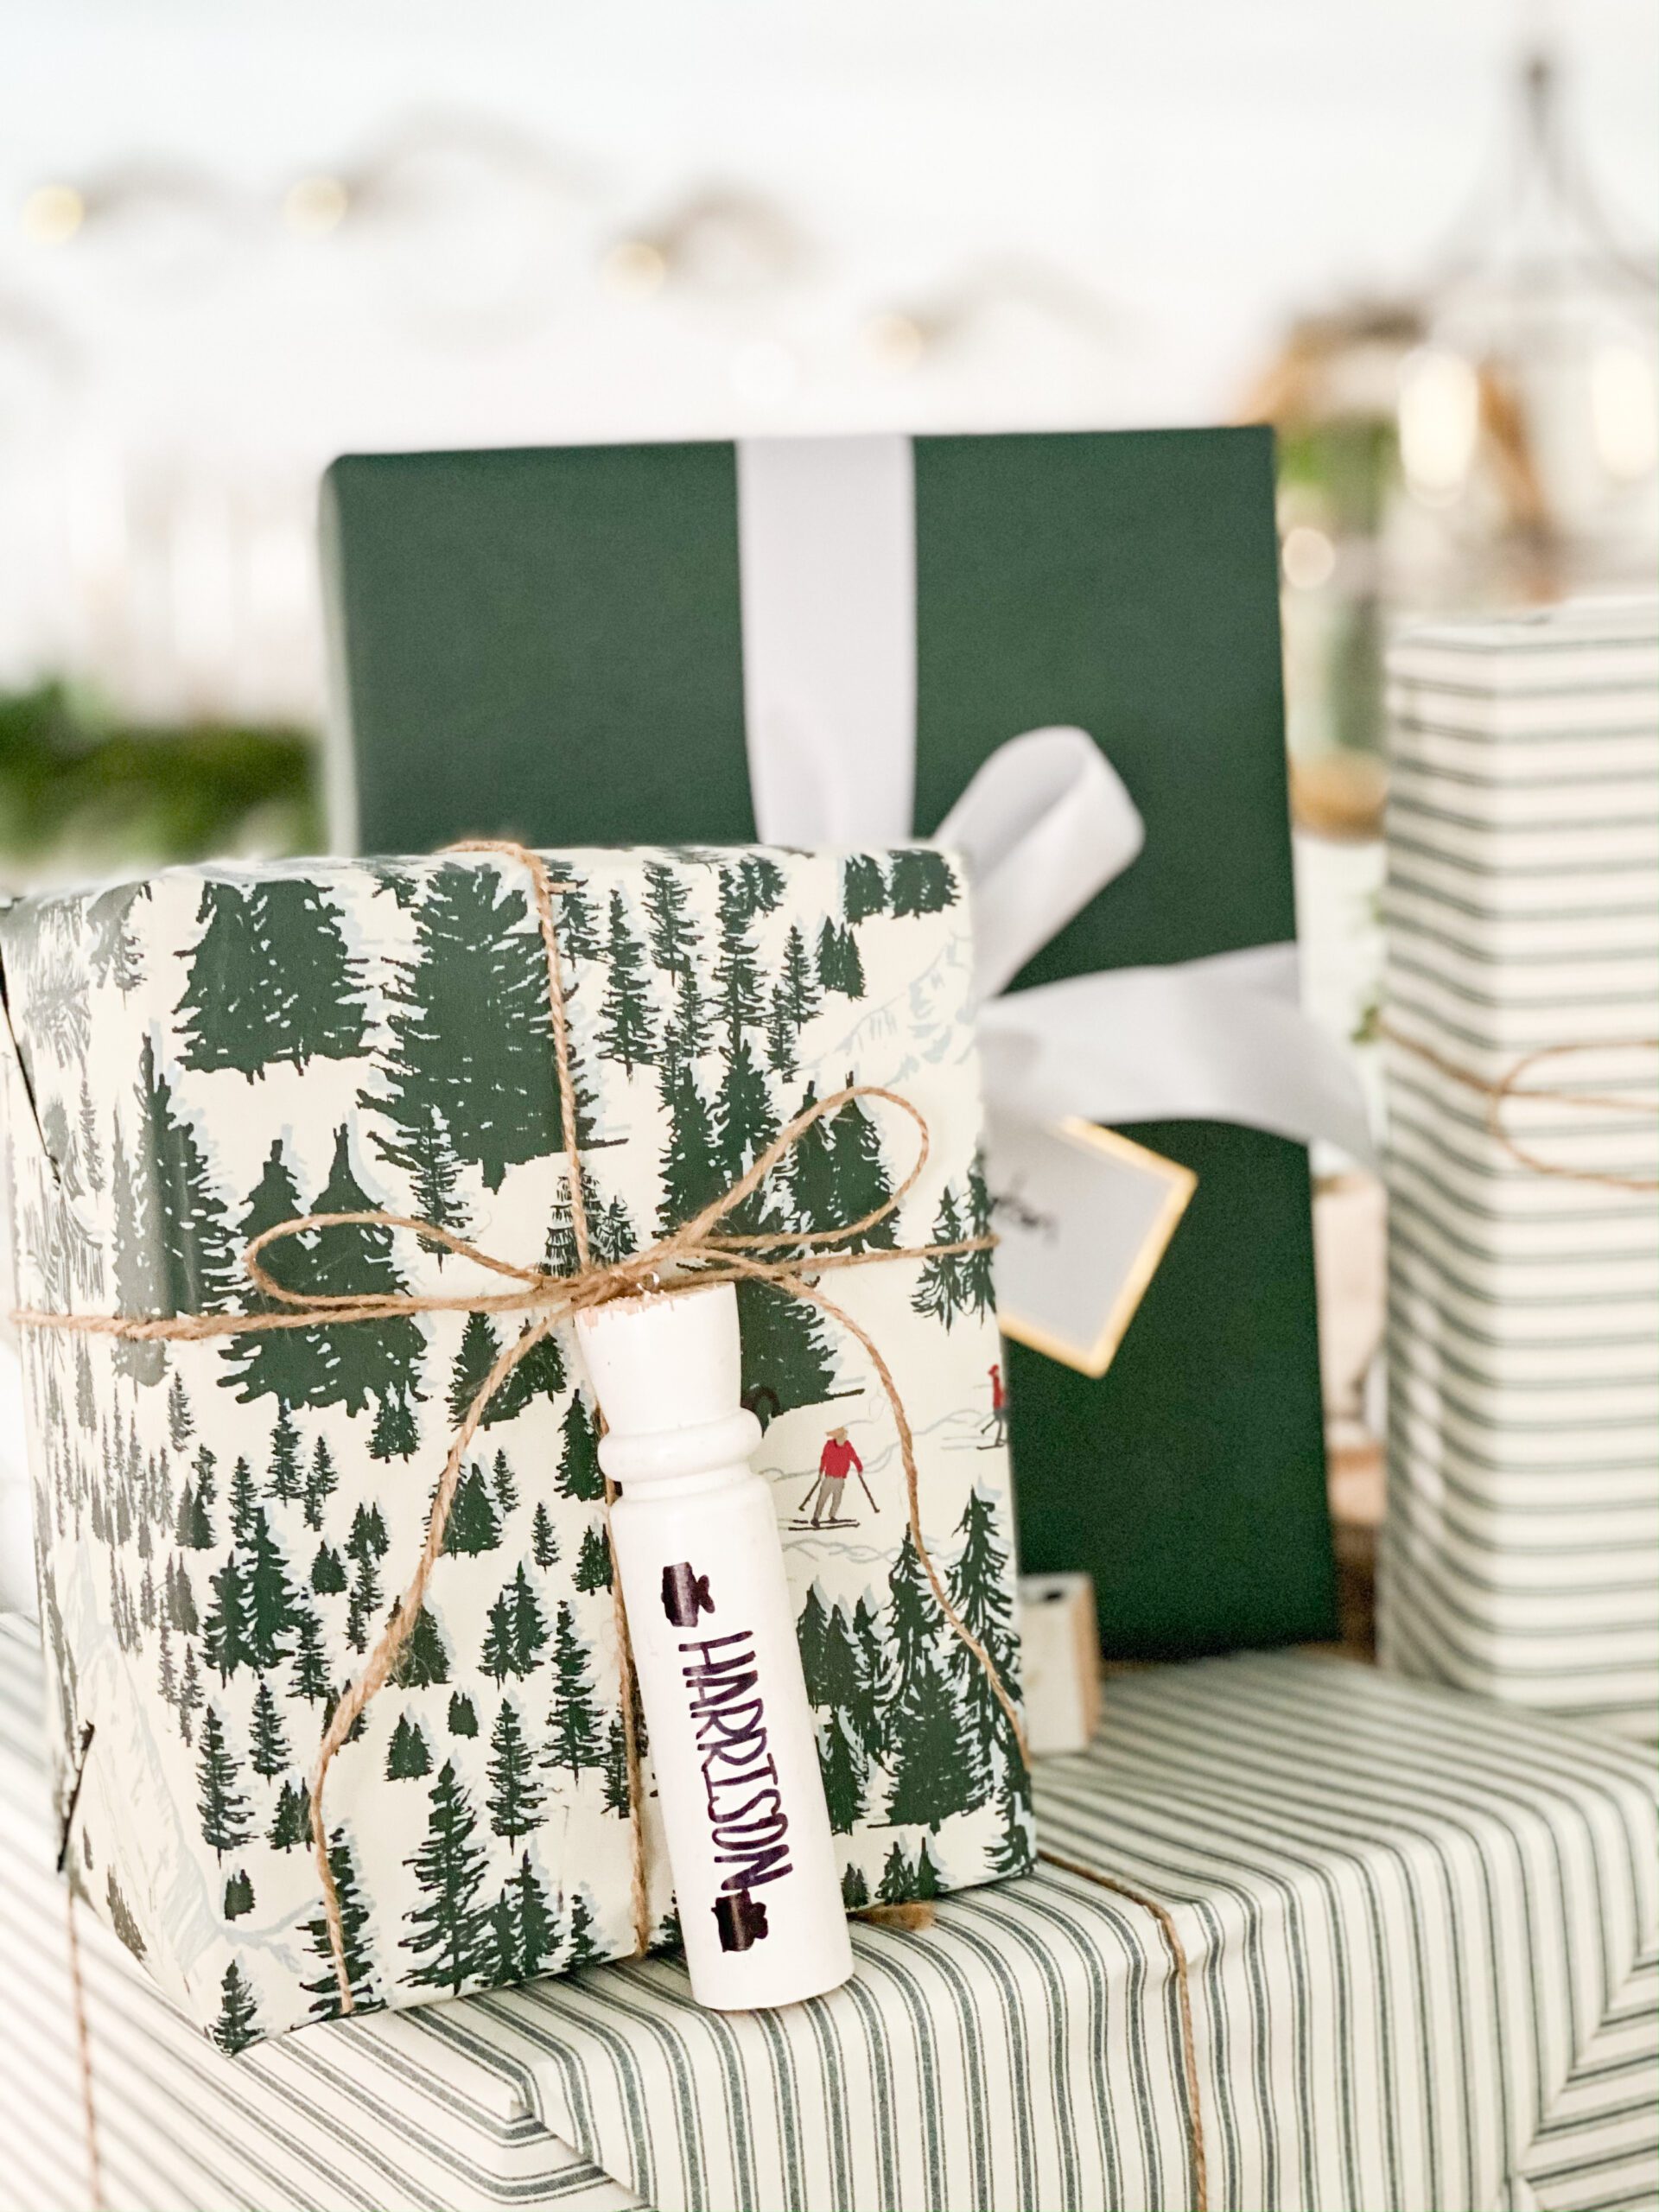 gift wrapped with Christmas tree wrapping paper with personalized wooden spindle tied around it